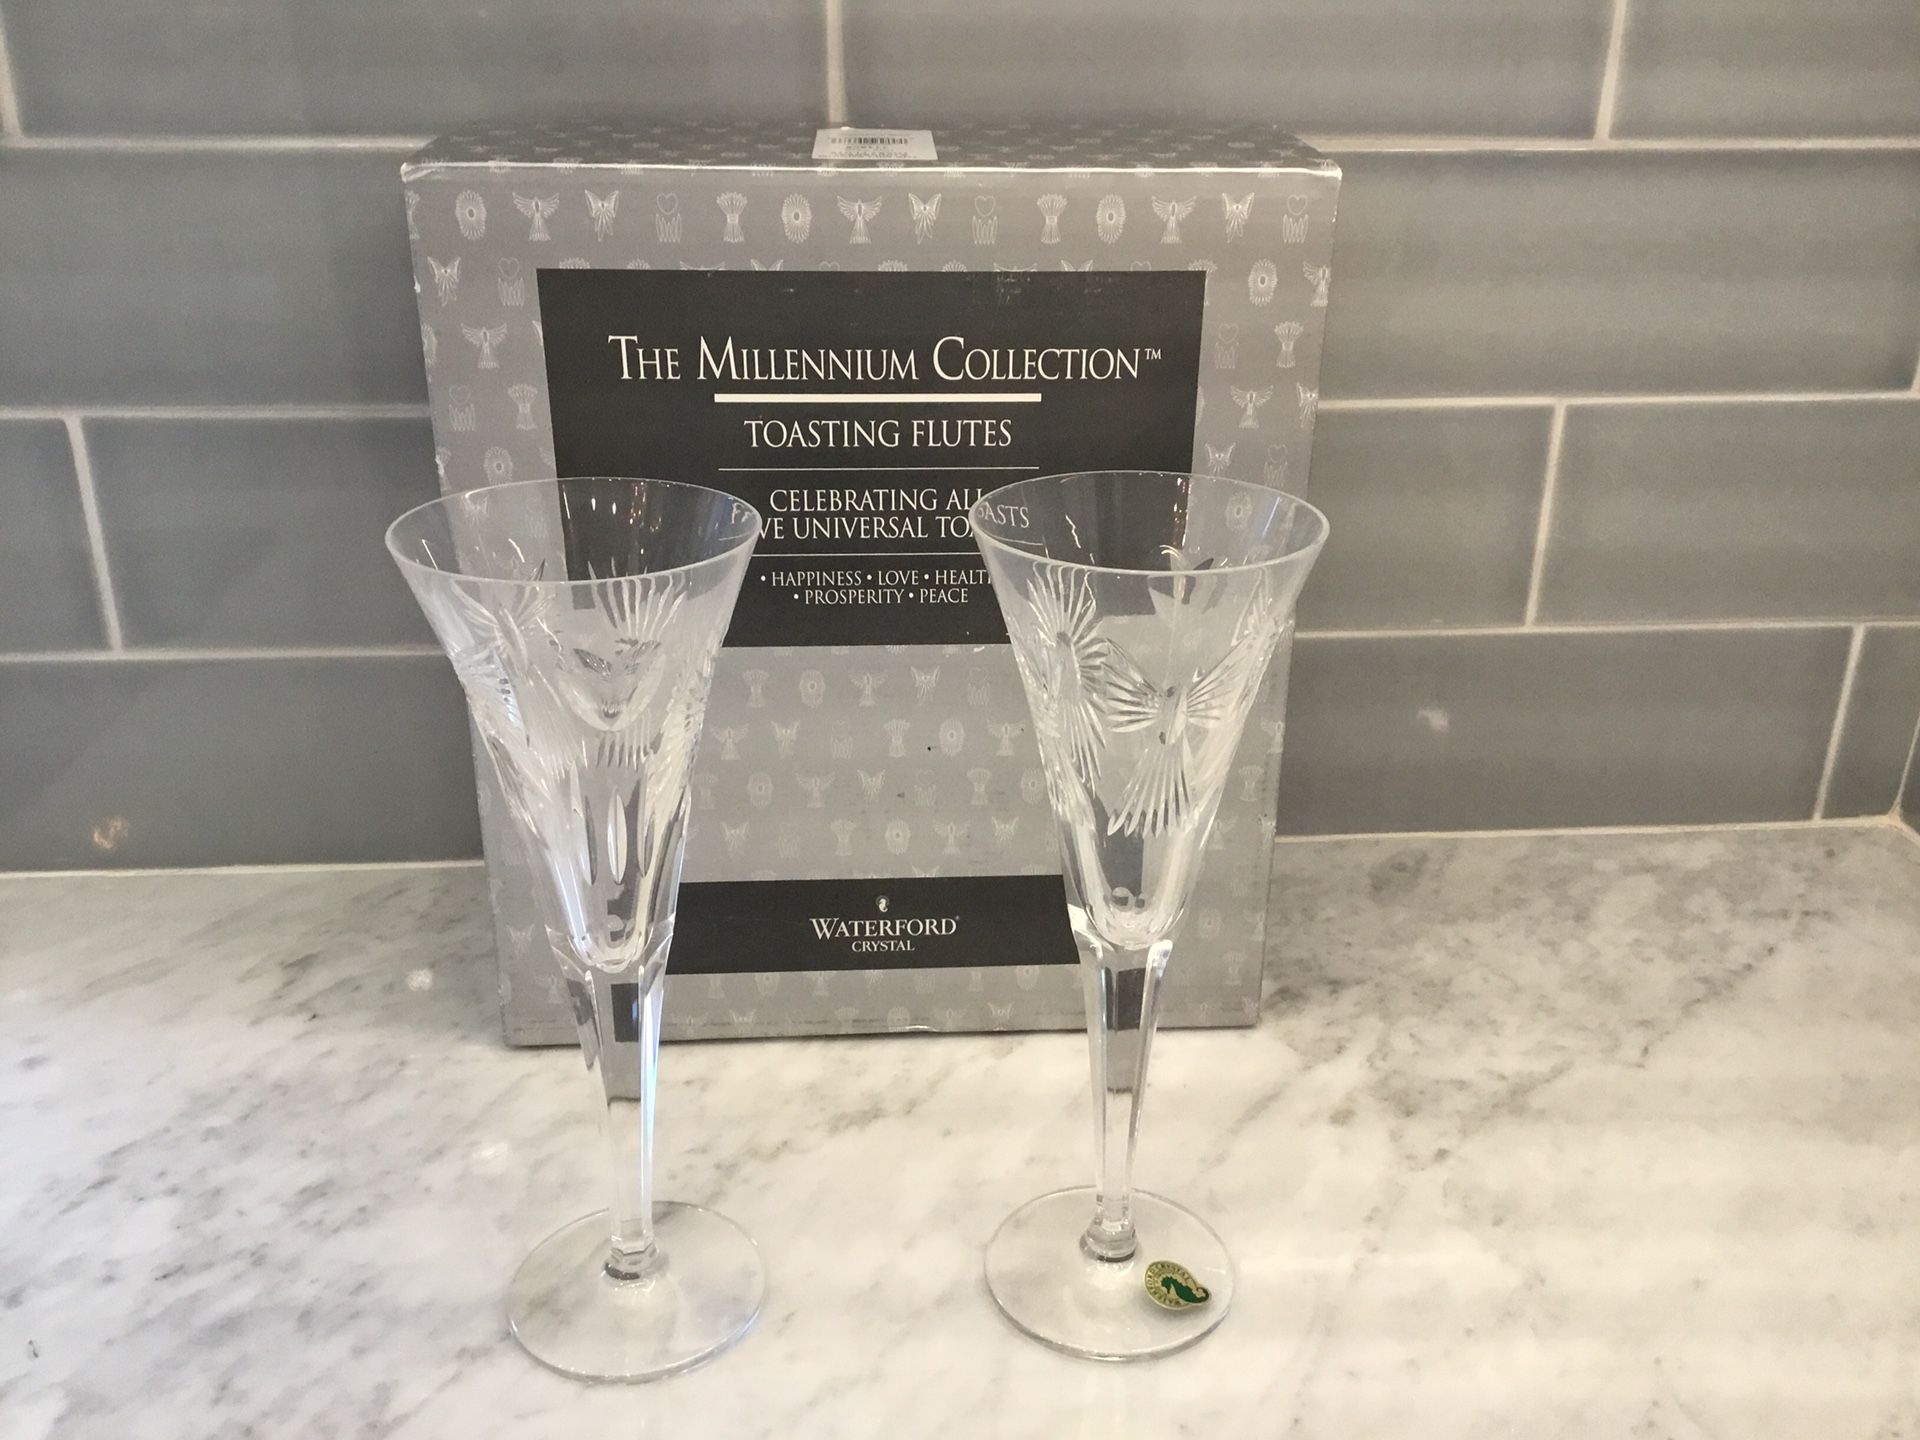 WATERFORD CRYSTAL TOASTING FLUTES- NEW IN BOX